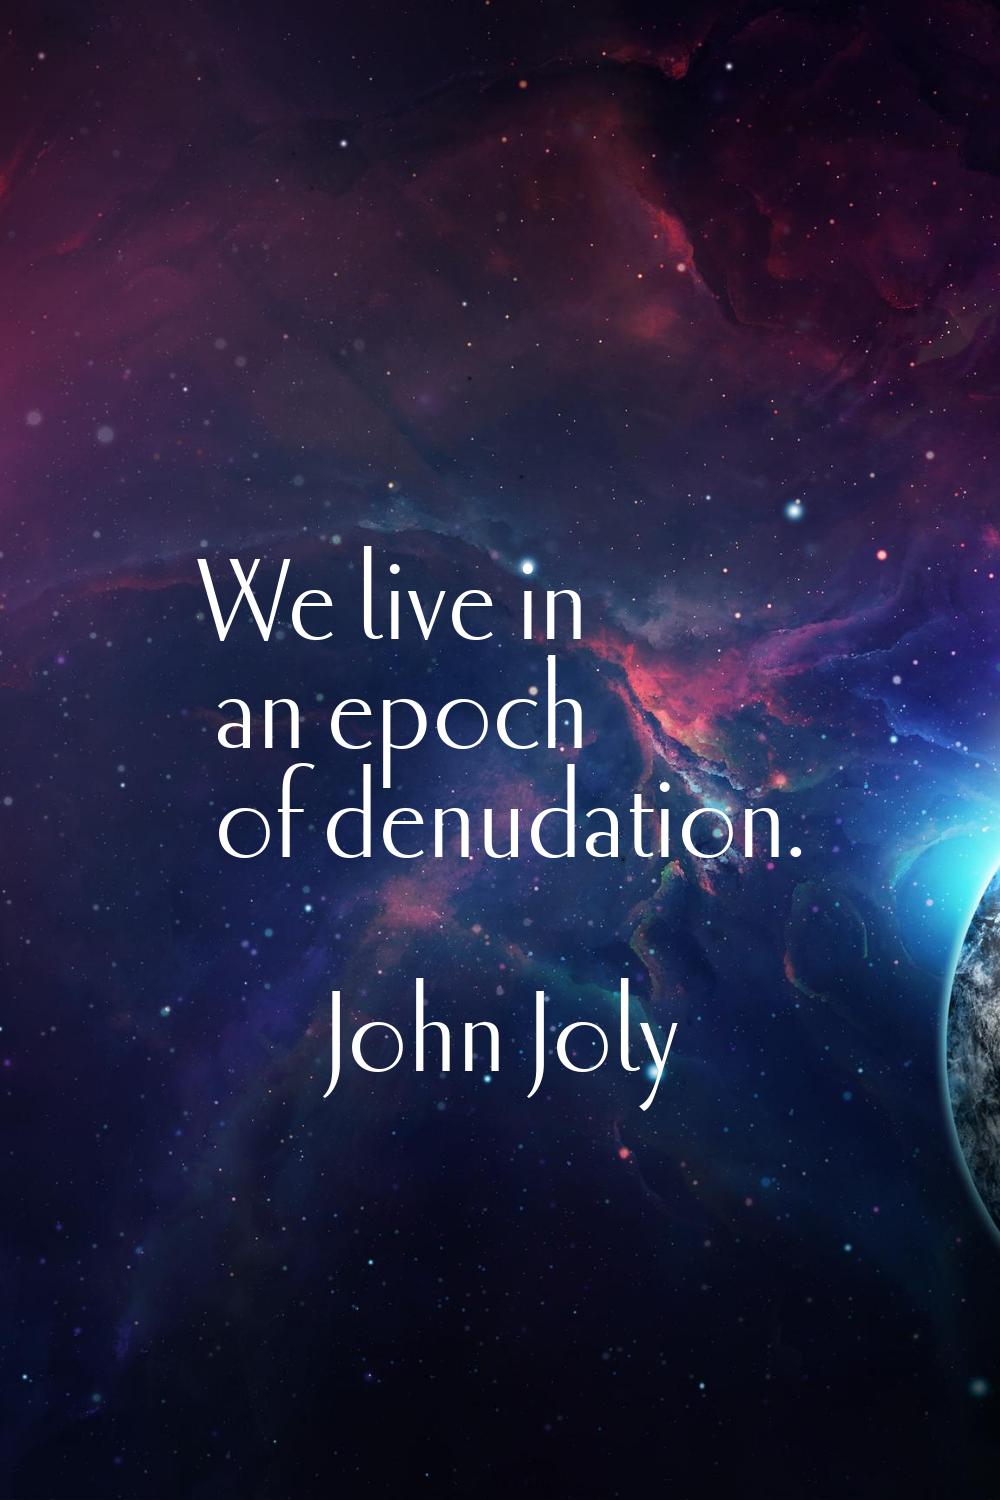 We live in an epoch of denudation.